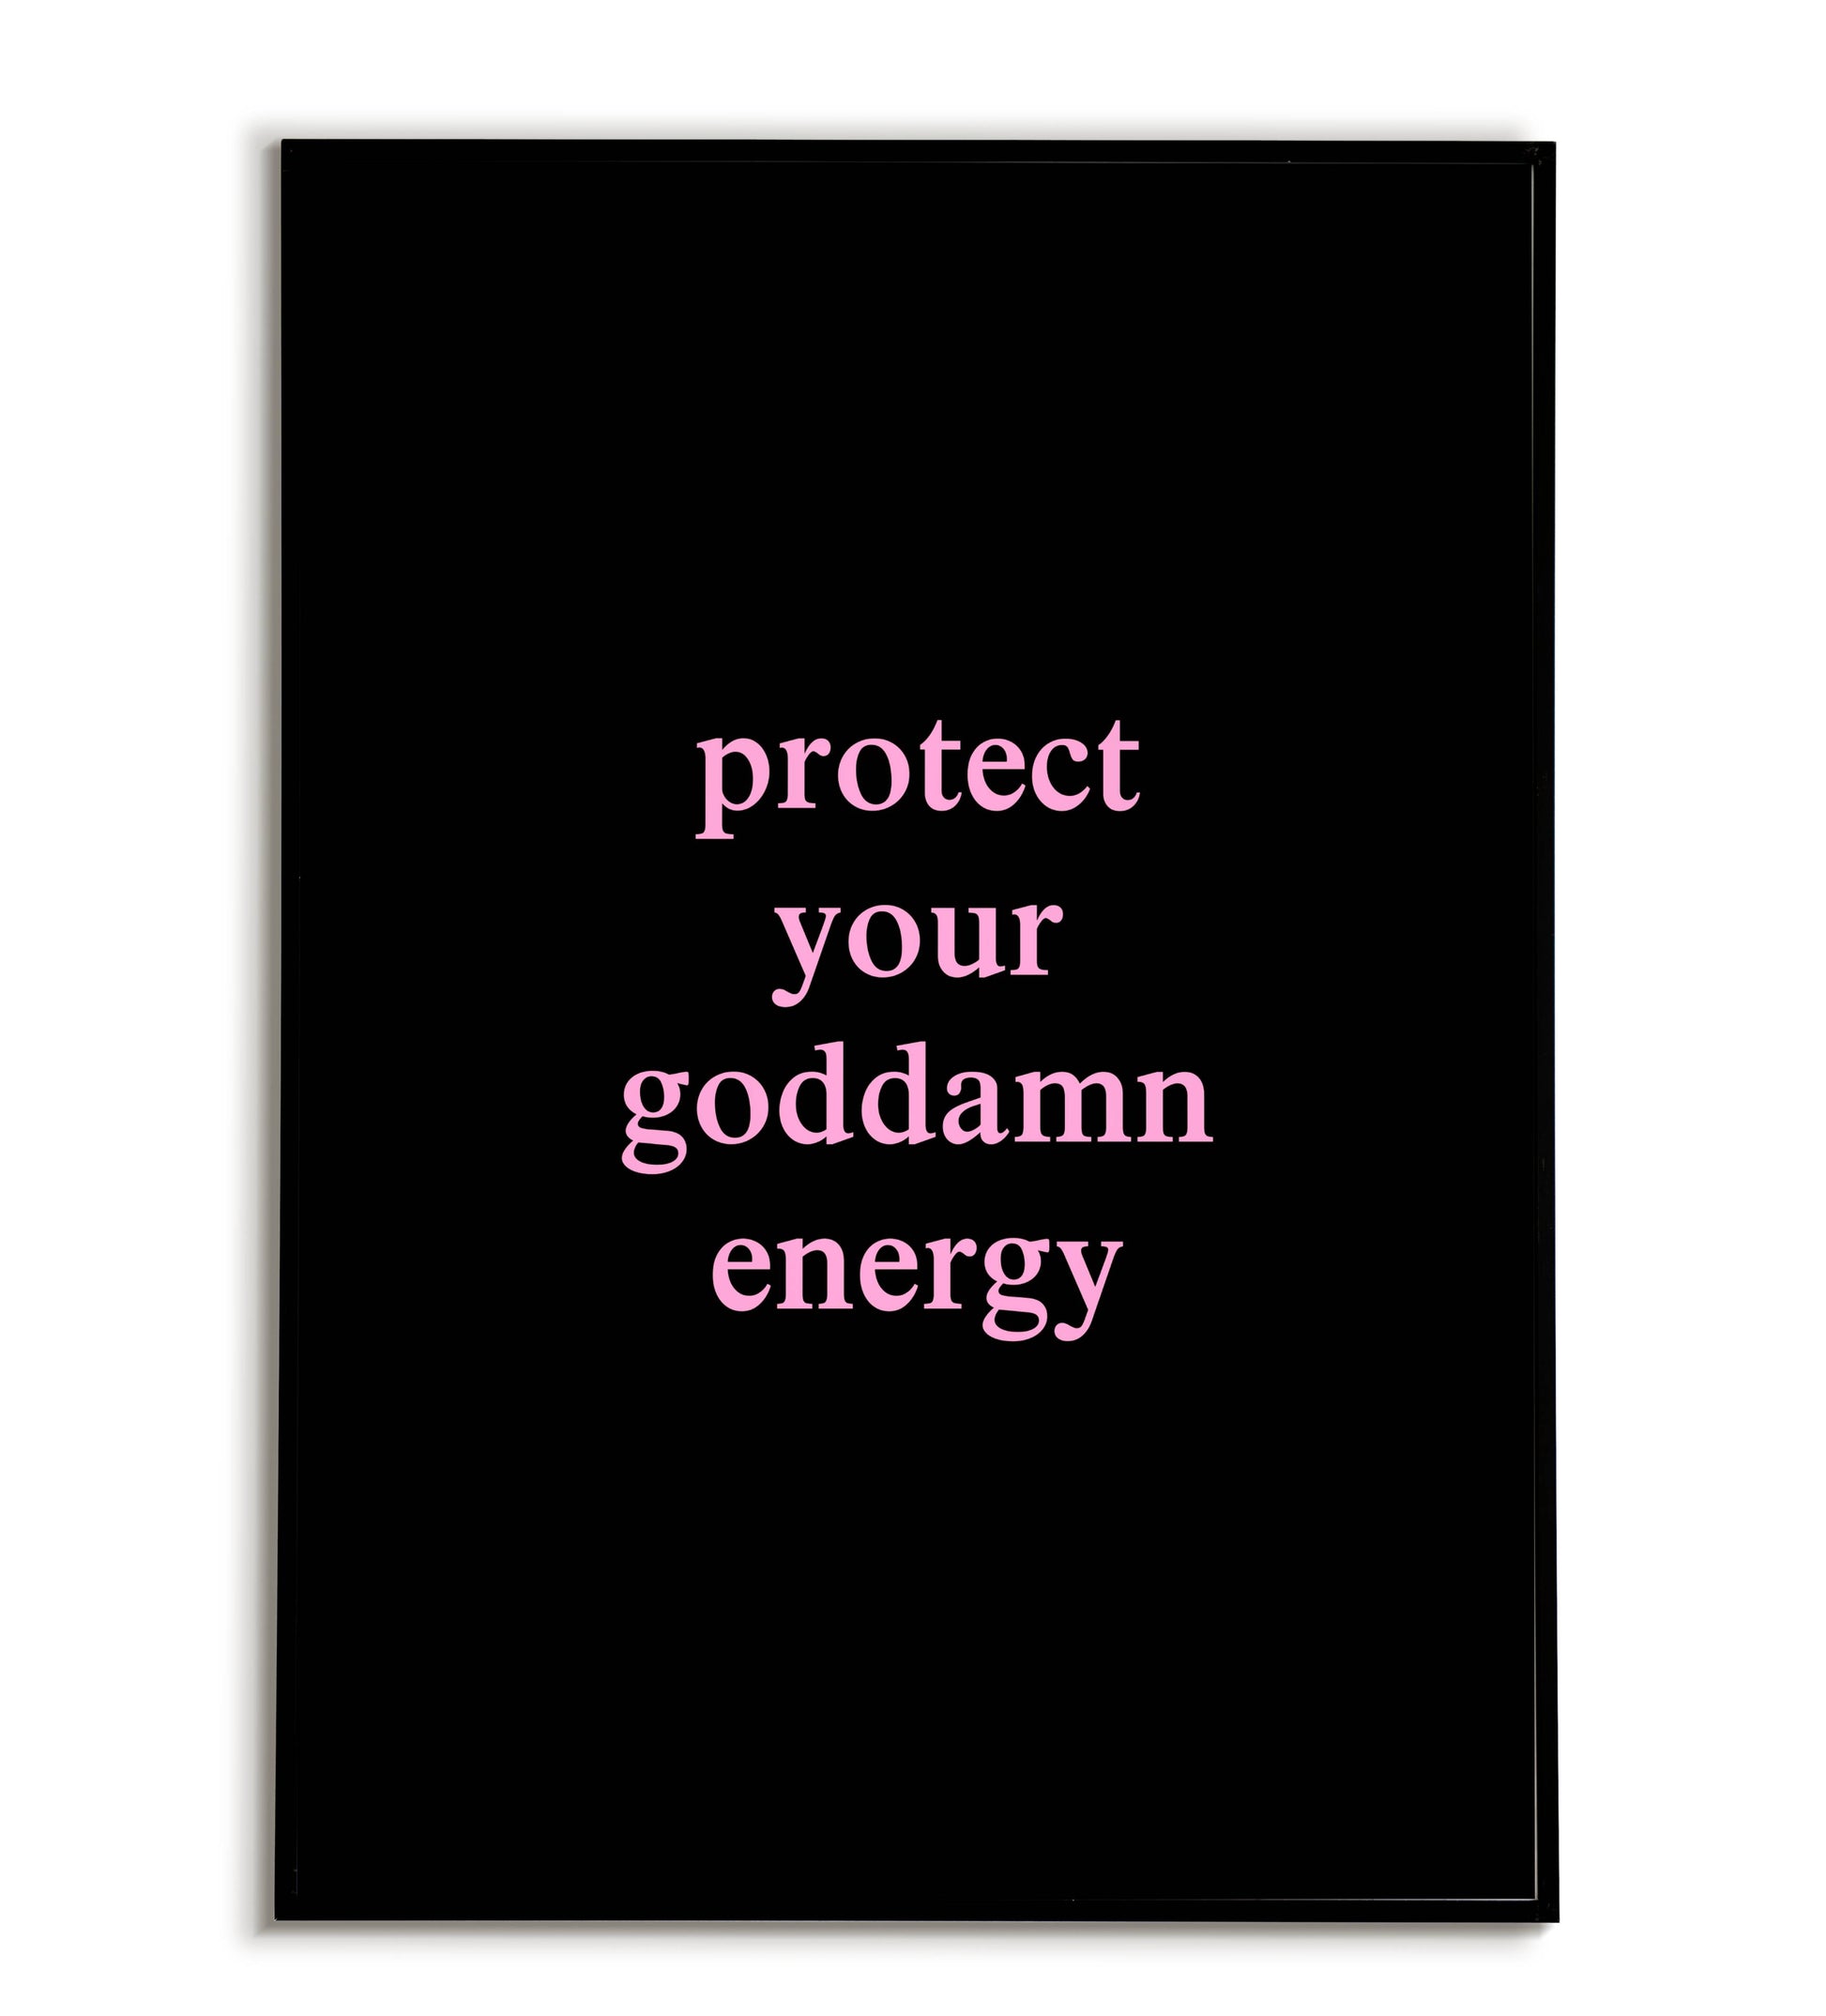 "Protect Your Goddamn Energy" printable motivational poster with a bold message.